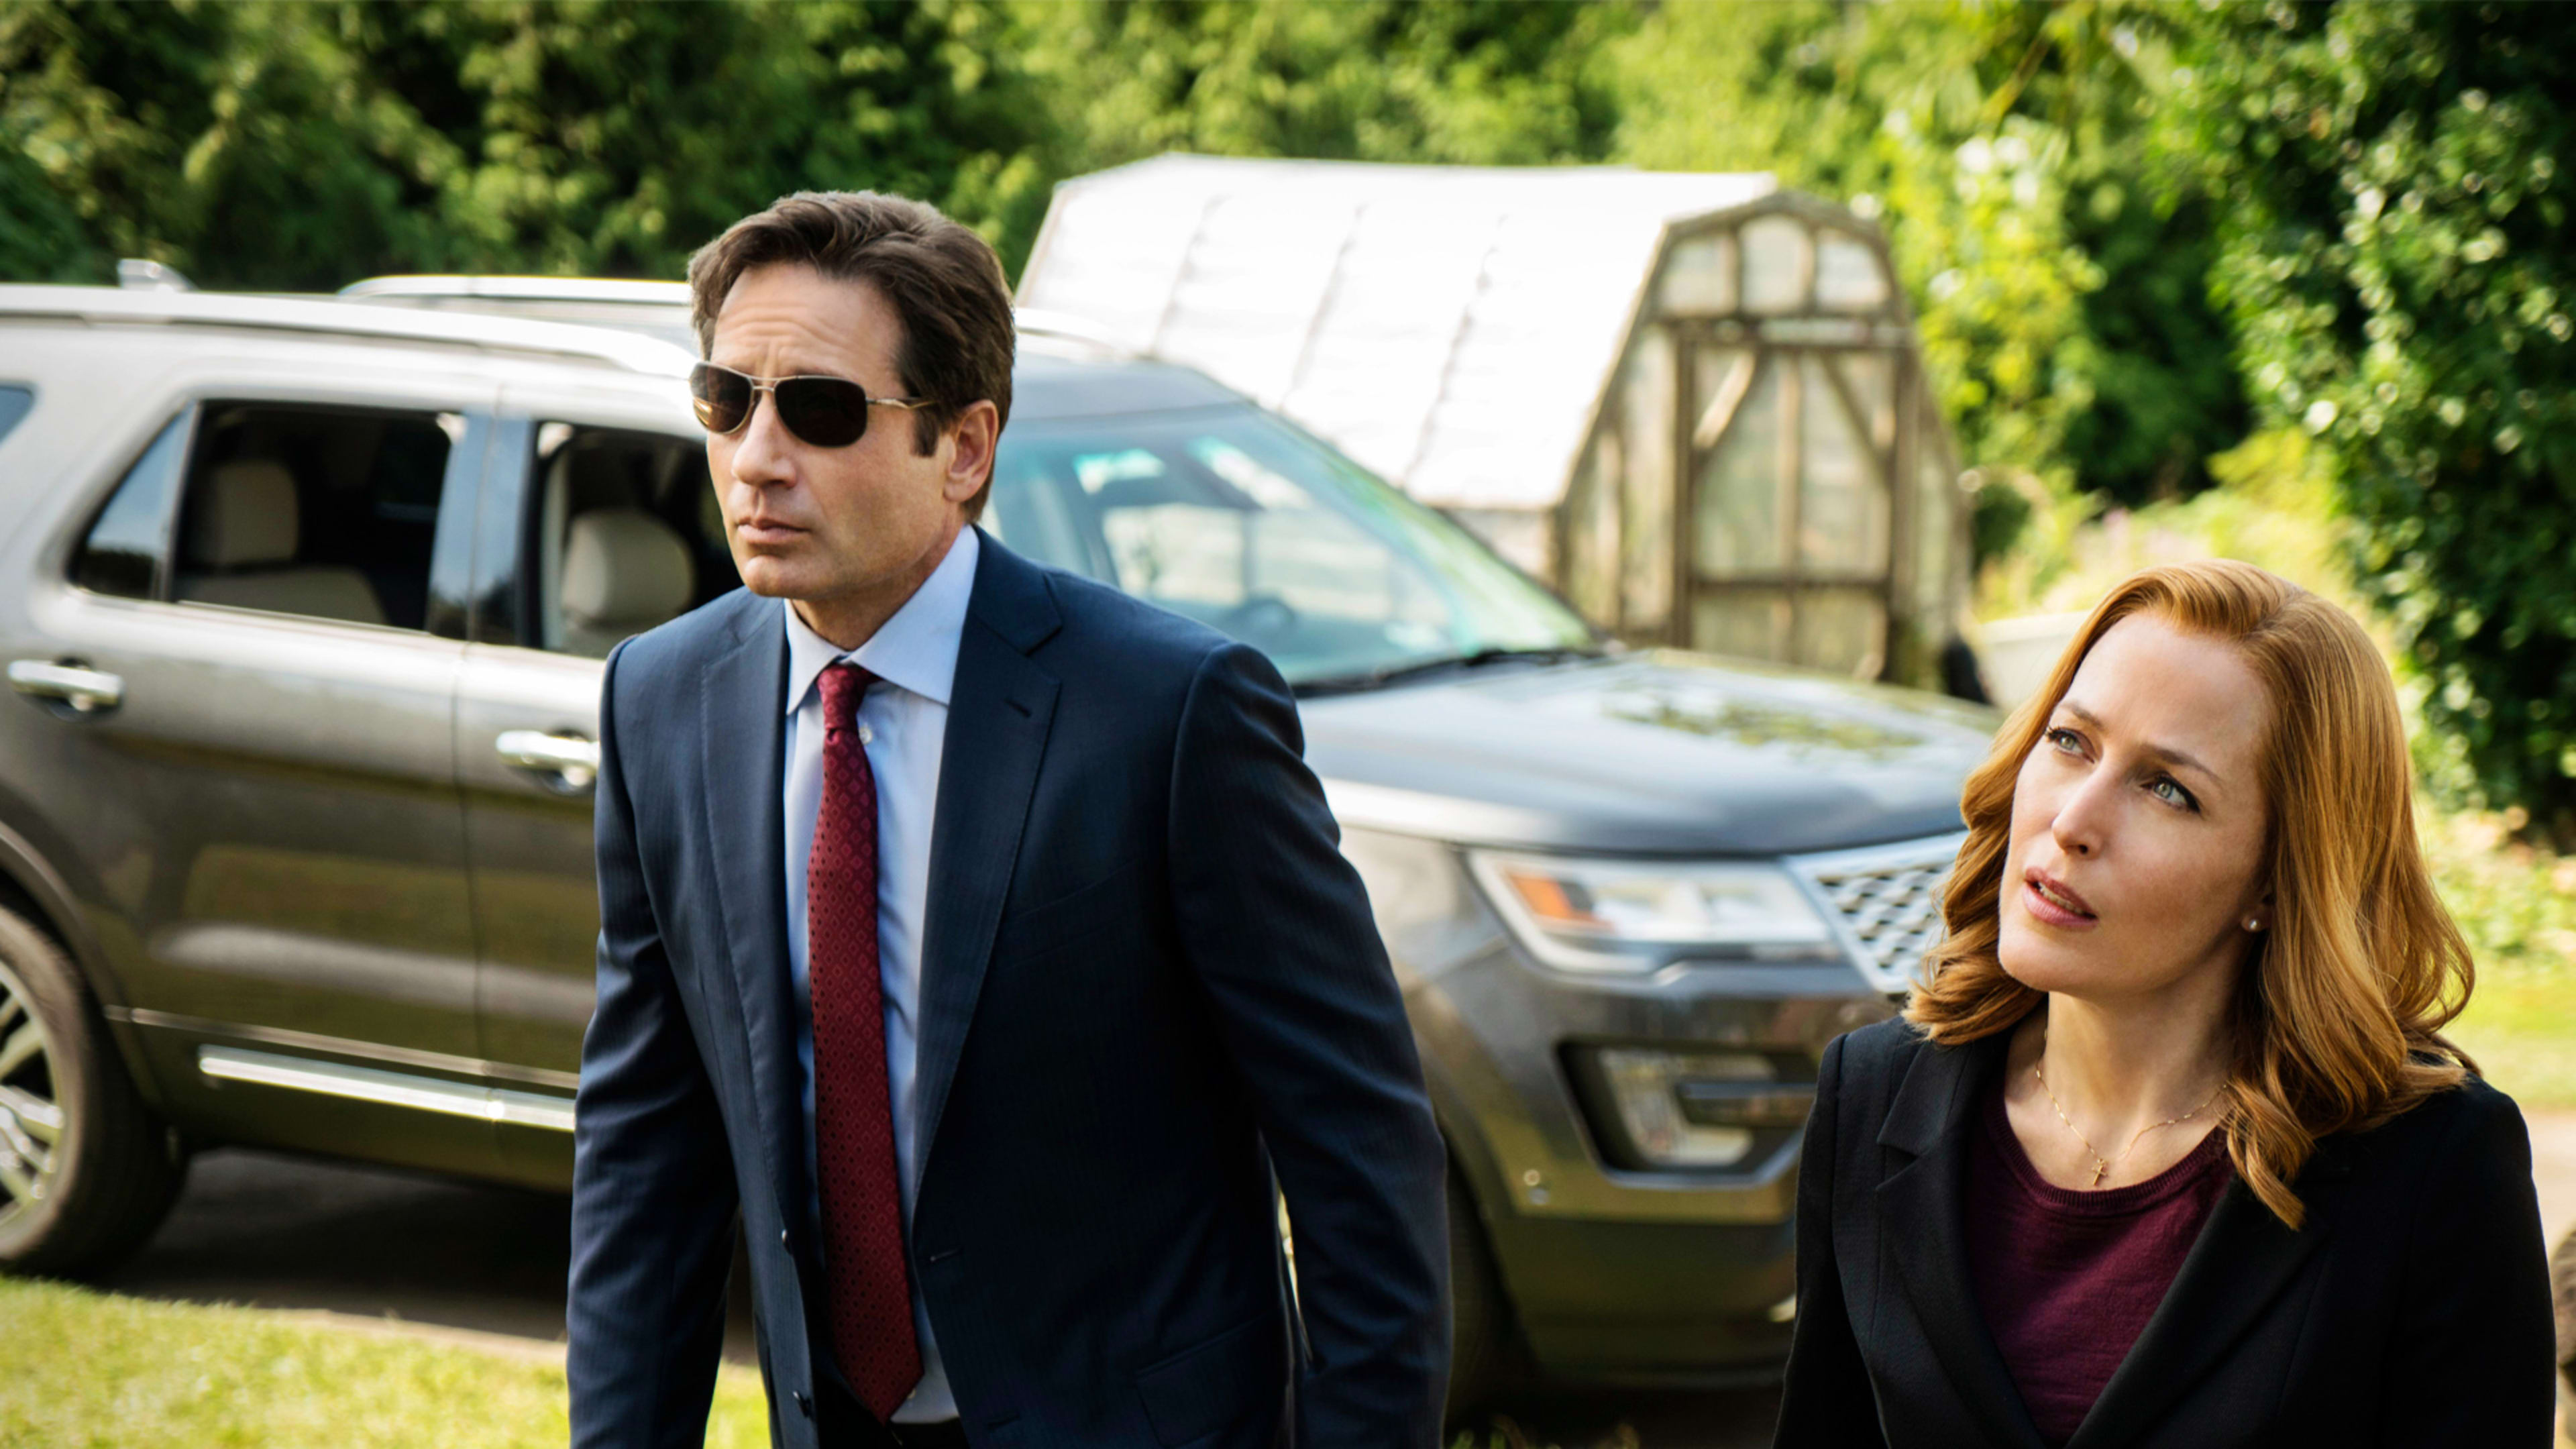 Inspired by Edward Snowden and the “Boo” Factor, Chris Carter Re-Opens “The X-Files”